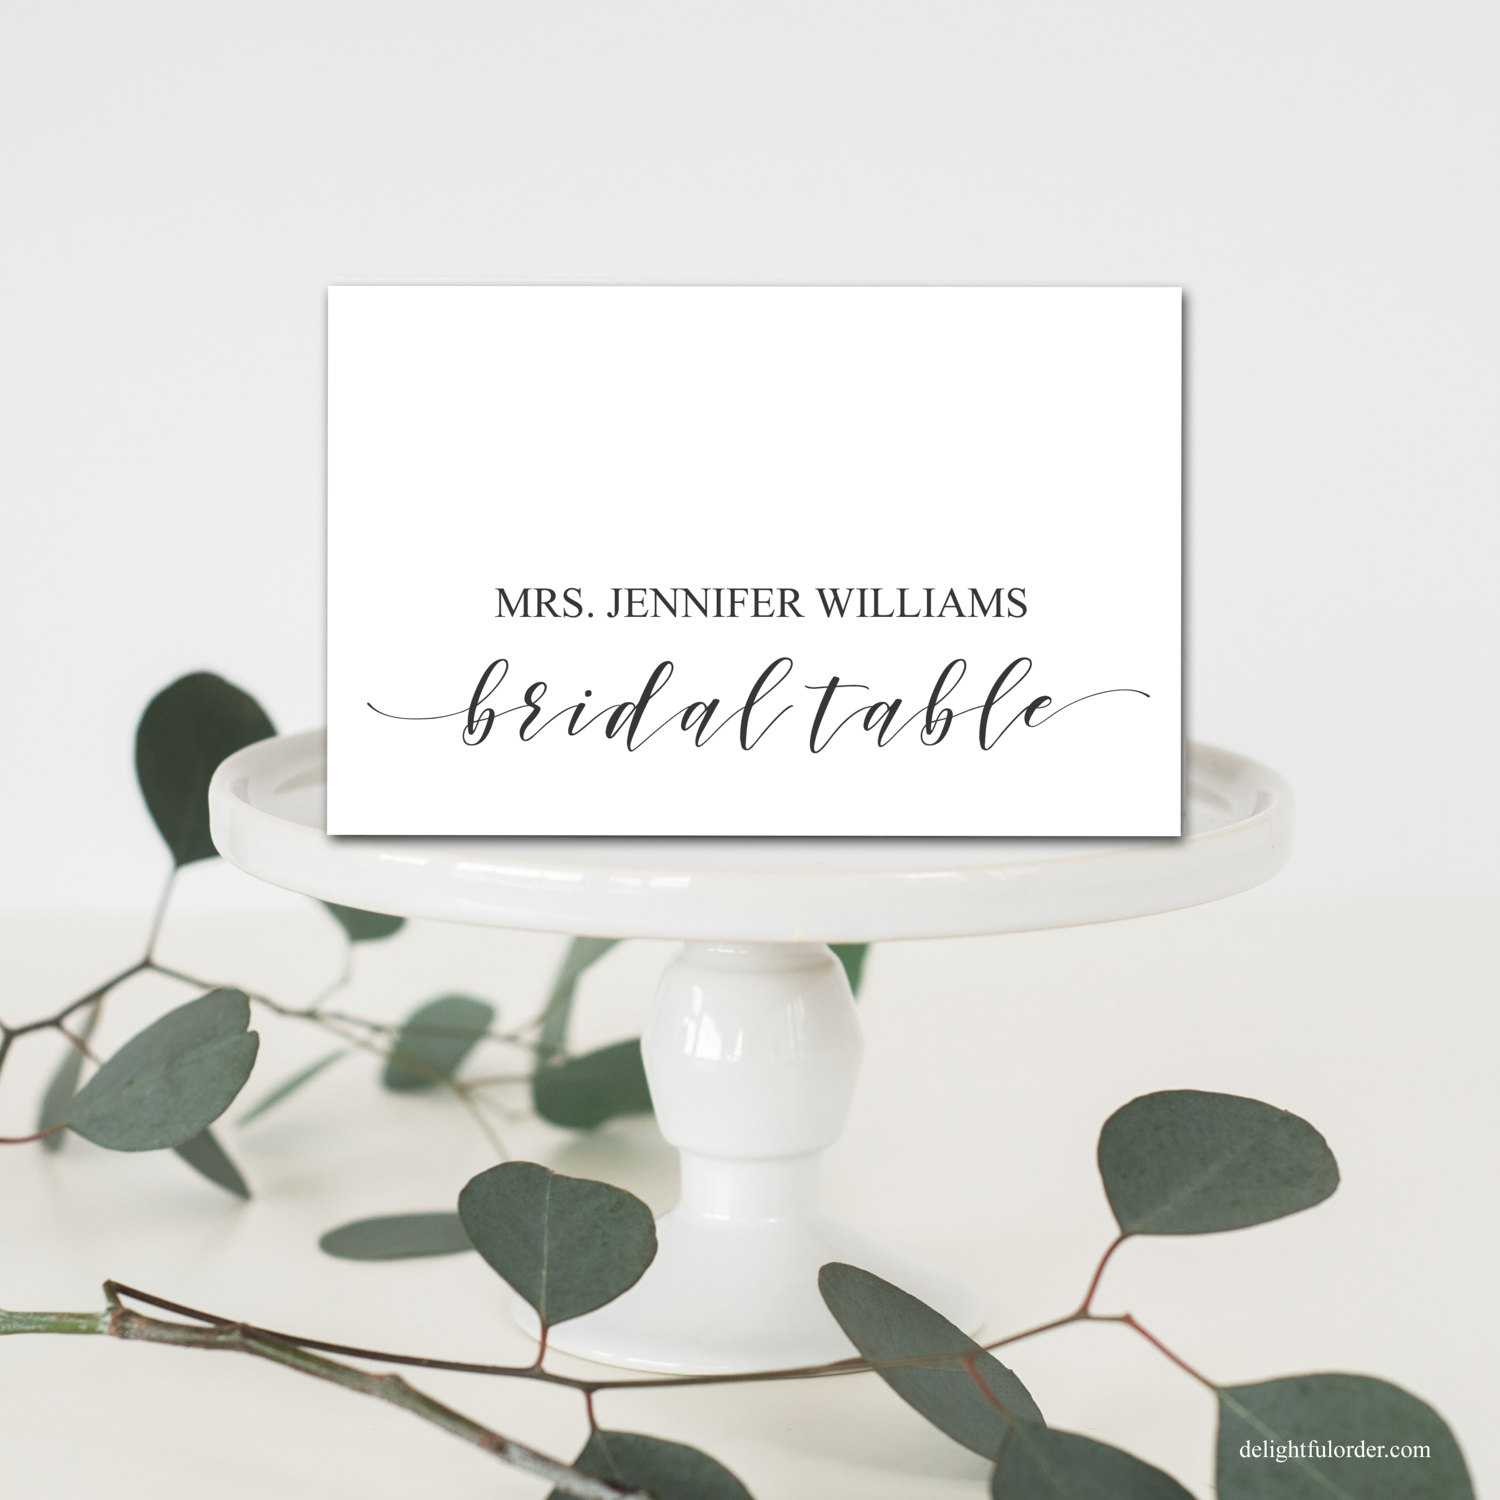 Editable Bridal Table Place Cards, Tent Fold Table Setting Name Cards,  Wedding Table Place Setting, Template, Diy Wedding, Pdf, Printable For Place Card Setting Template